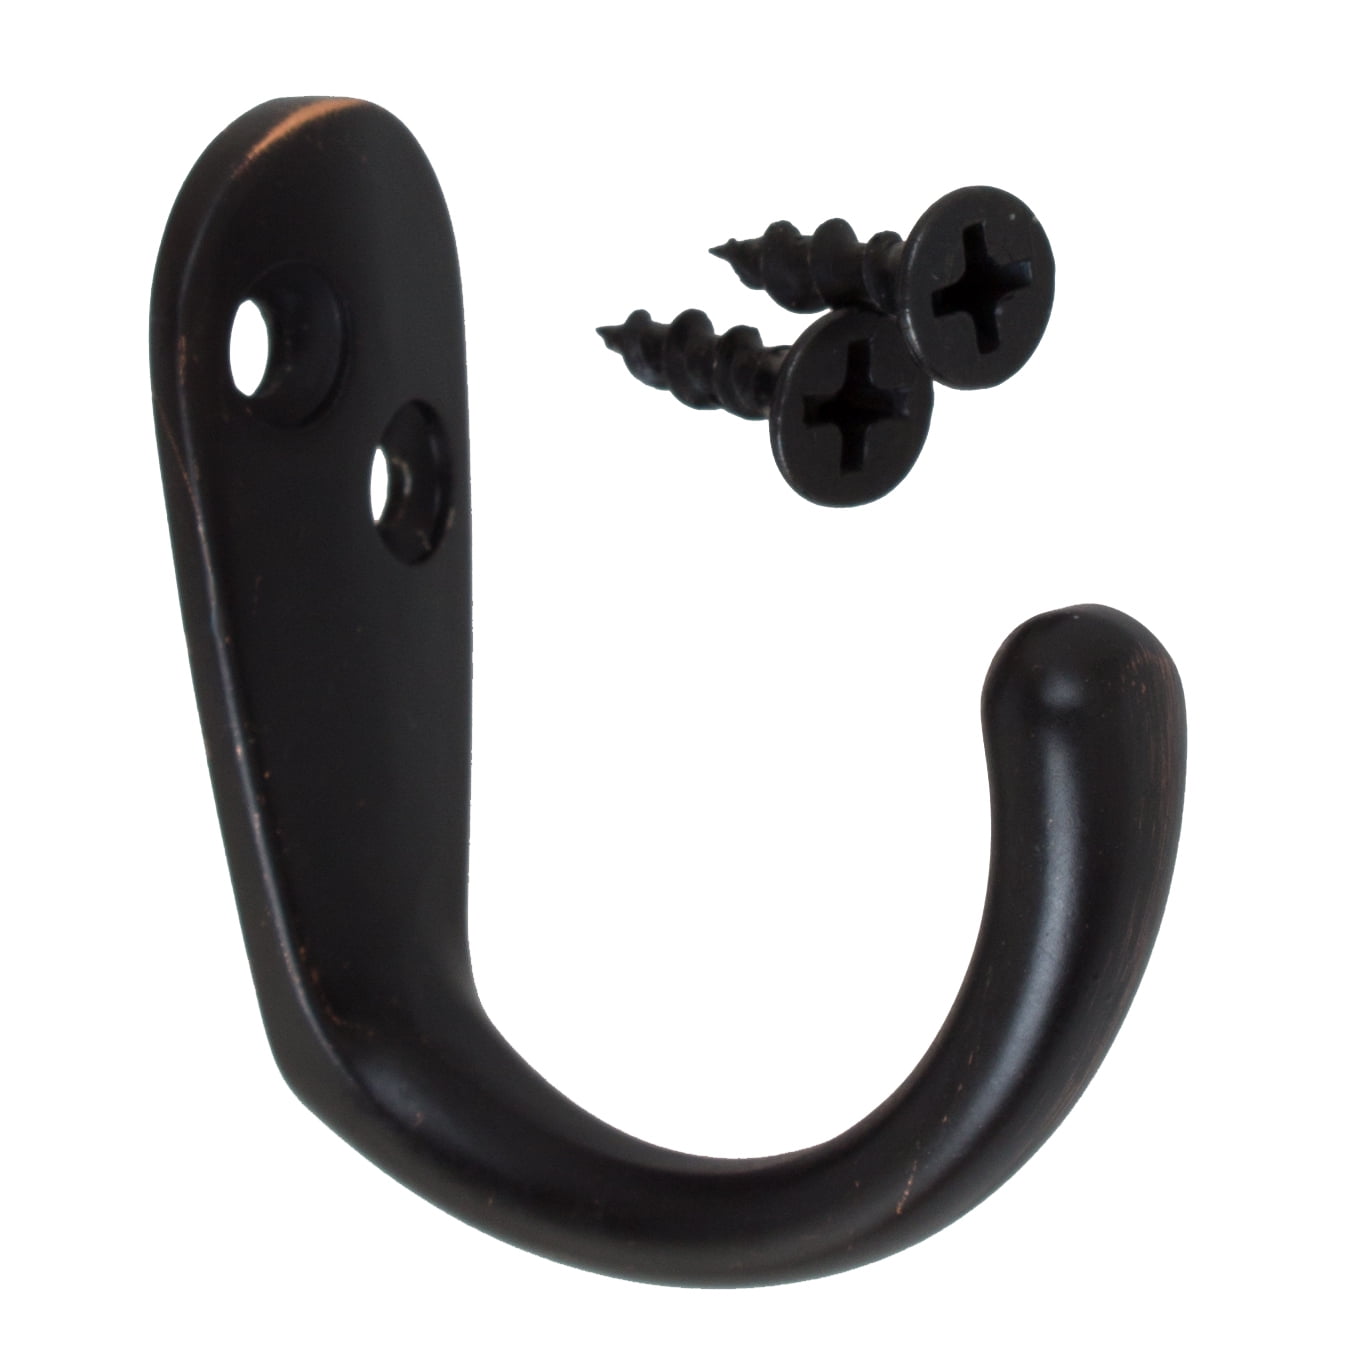 GlideRite Large Robe/Coat/Hat Double Wall Hook Matte Black - 7014-MB-1